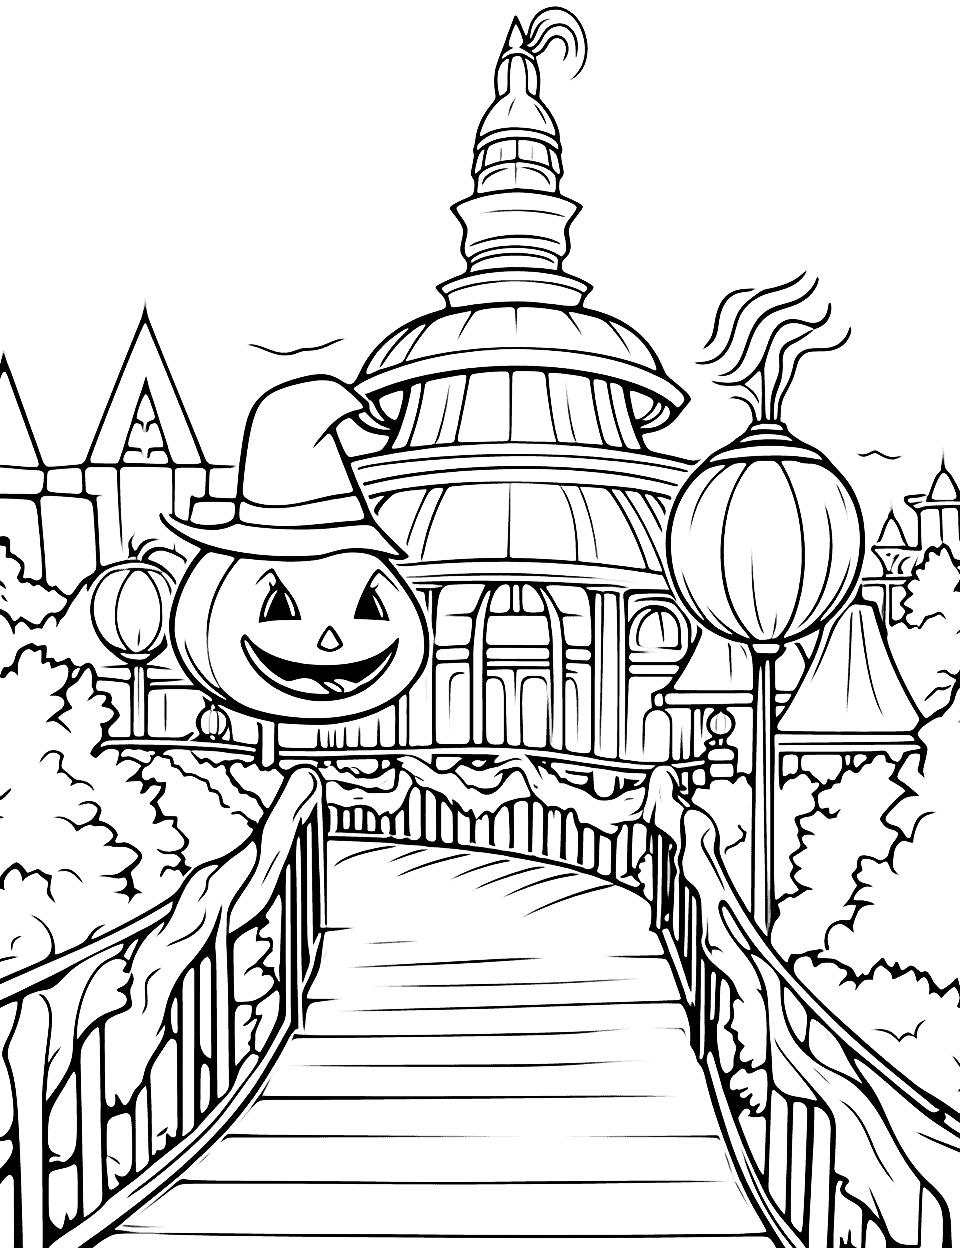 Abandoned Theme Park Halloween Coloring Page - A spooky path leading to an abandoned theme park.